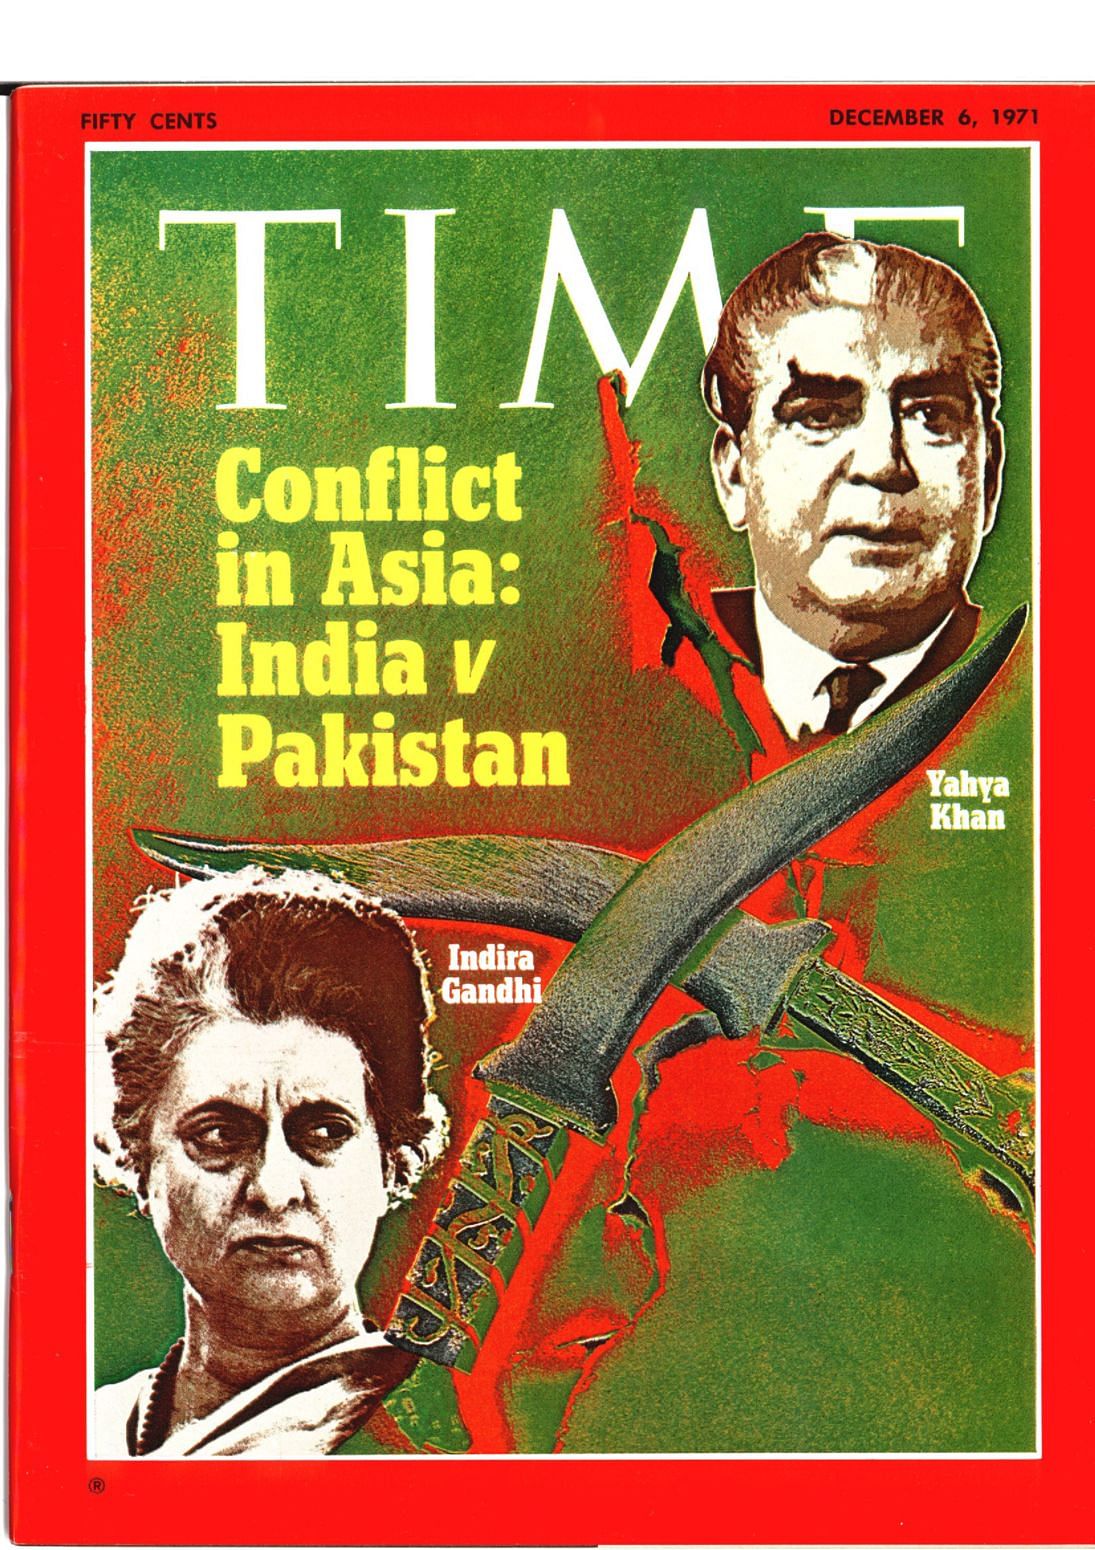 The Quint  takes a look at how India’s contemporary history has been depicted on the covers of TIME magazine.